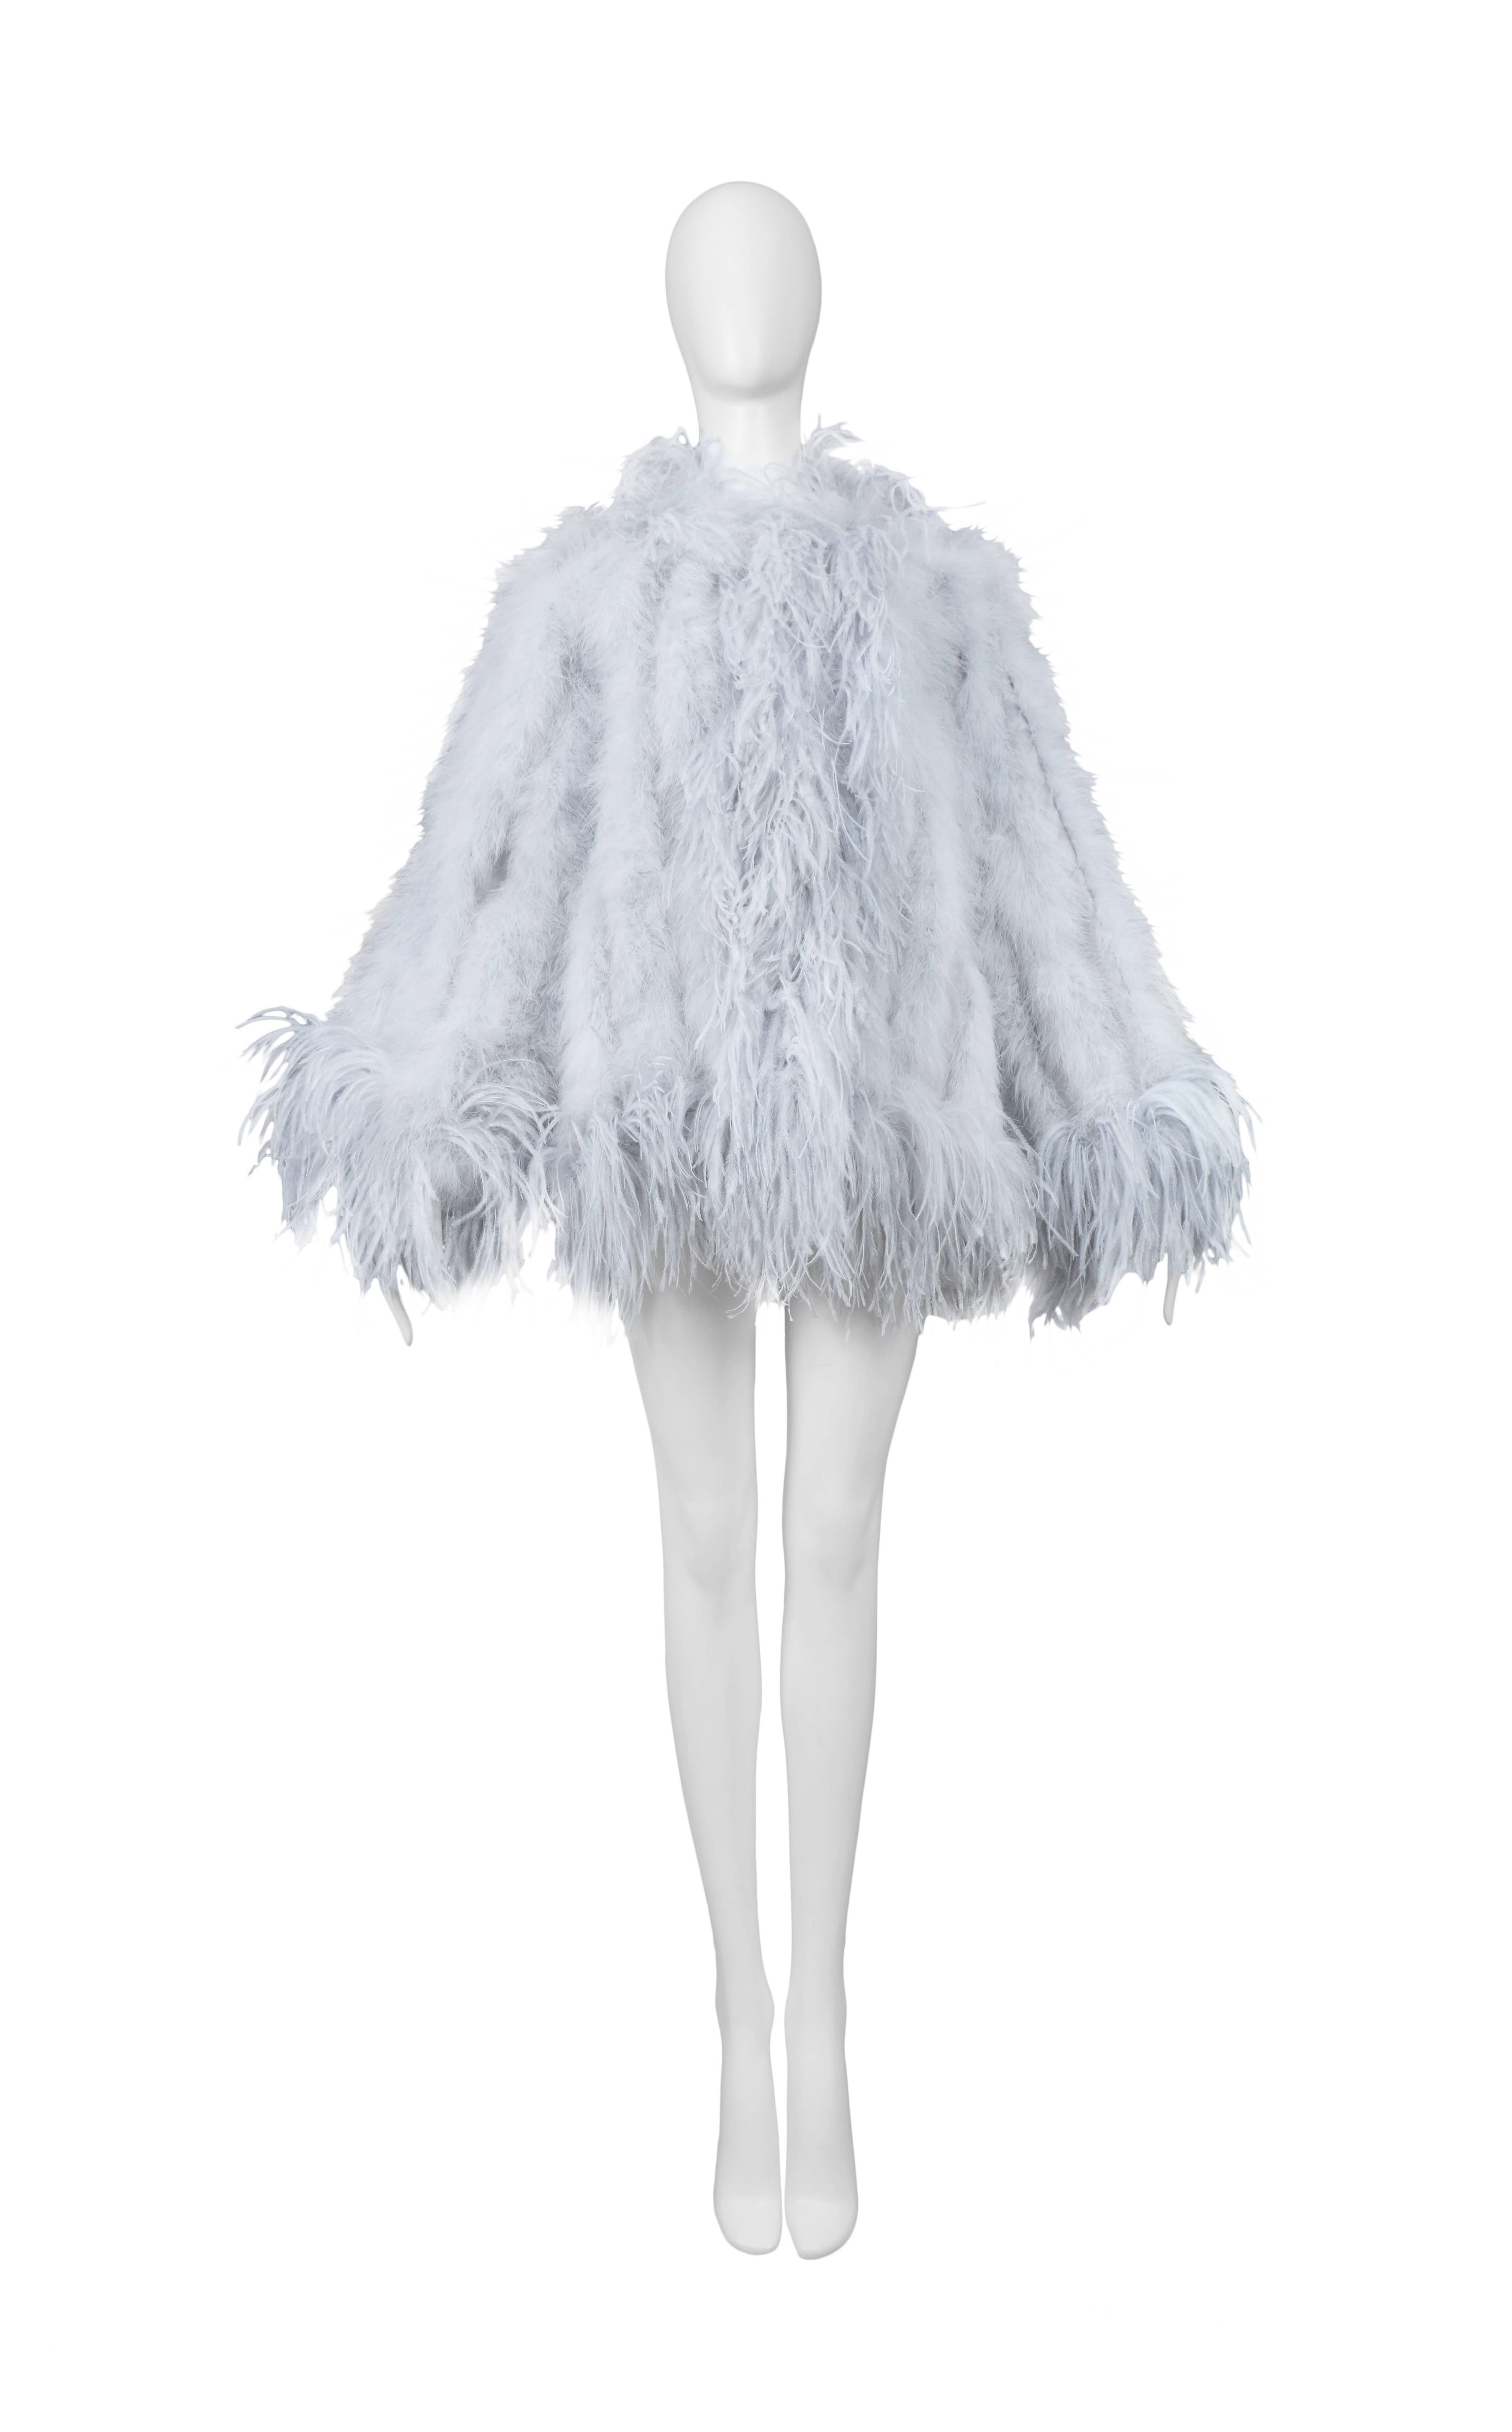 Vintage Yves Saint Laurent silver grey marabou feather coat featuring a loose feather trim along the edges.
Please inquire for additional images.